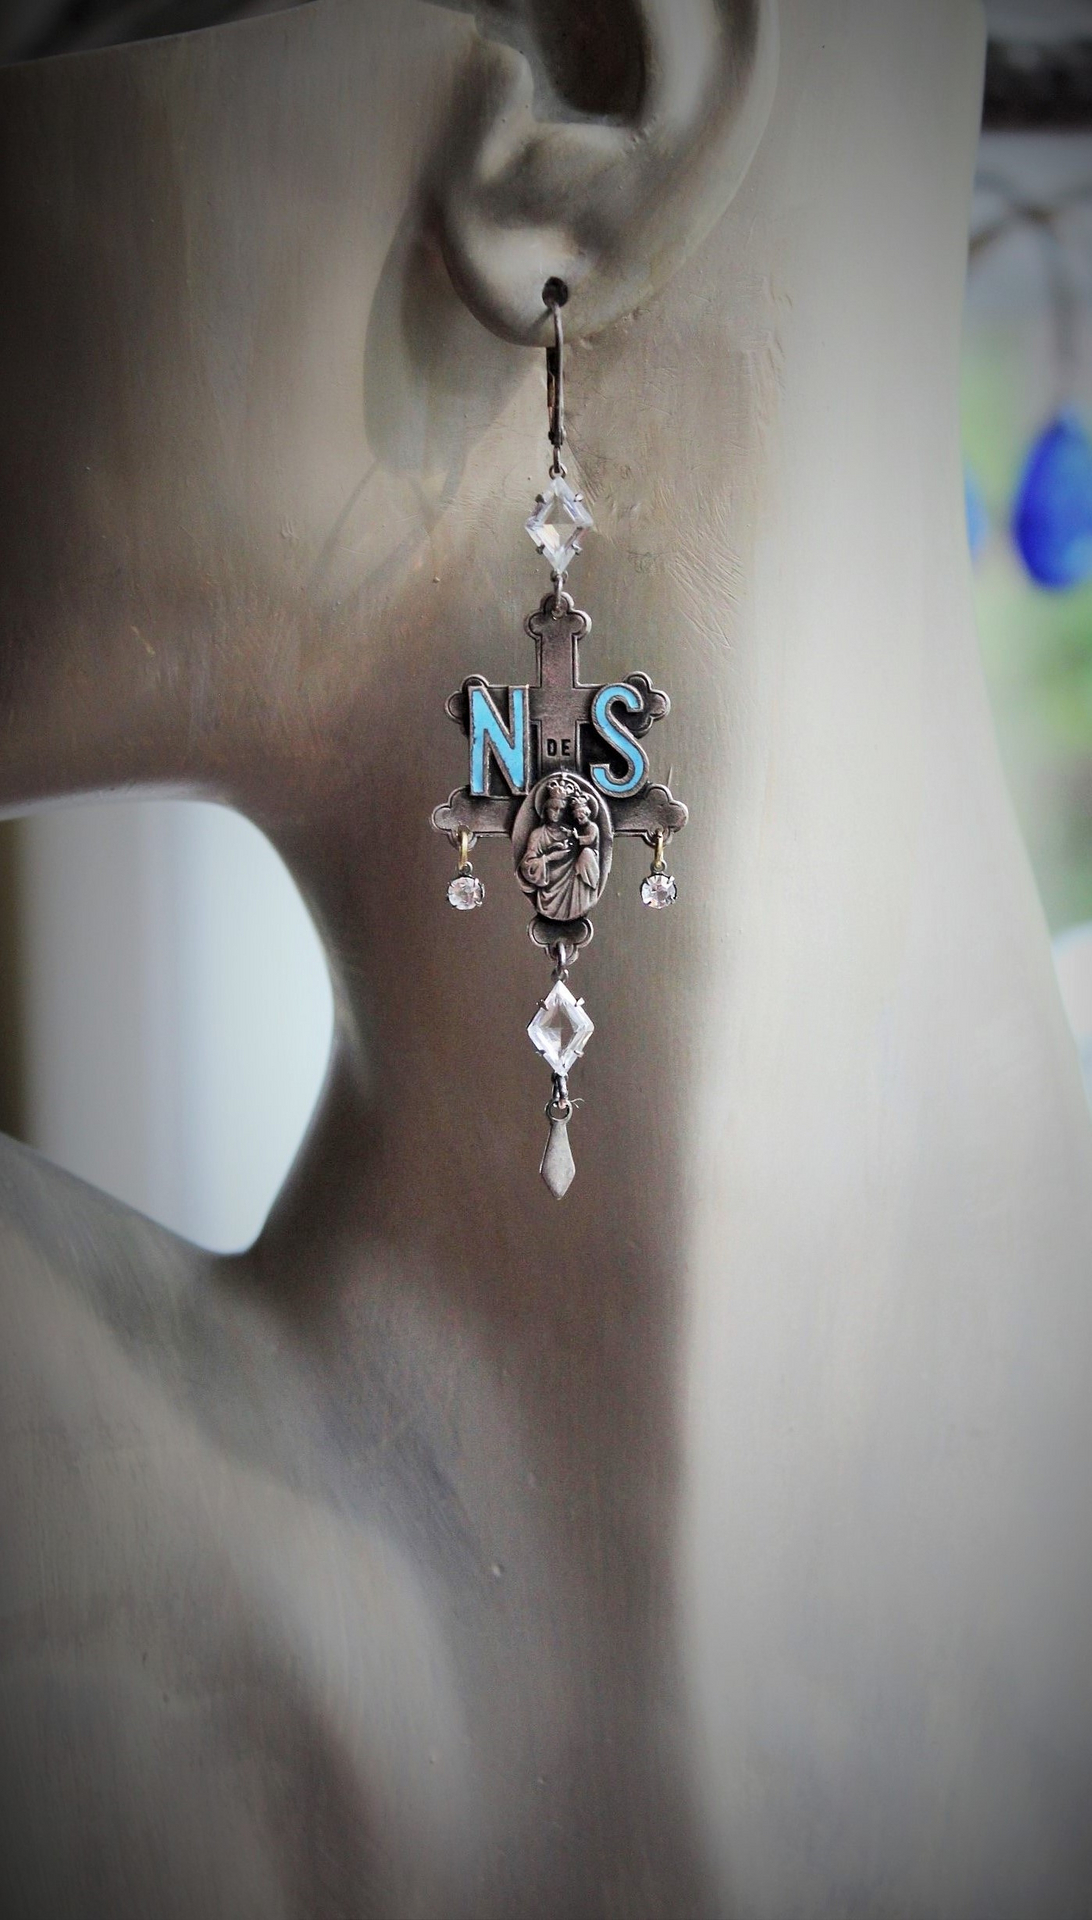 Our Lady of Sion Earrings w/Extraordinary Matching Antique French Our Lady of Sion Blue Enamel Medals,Antique Faceted Crystals,Sterling Earring Wires